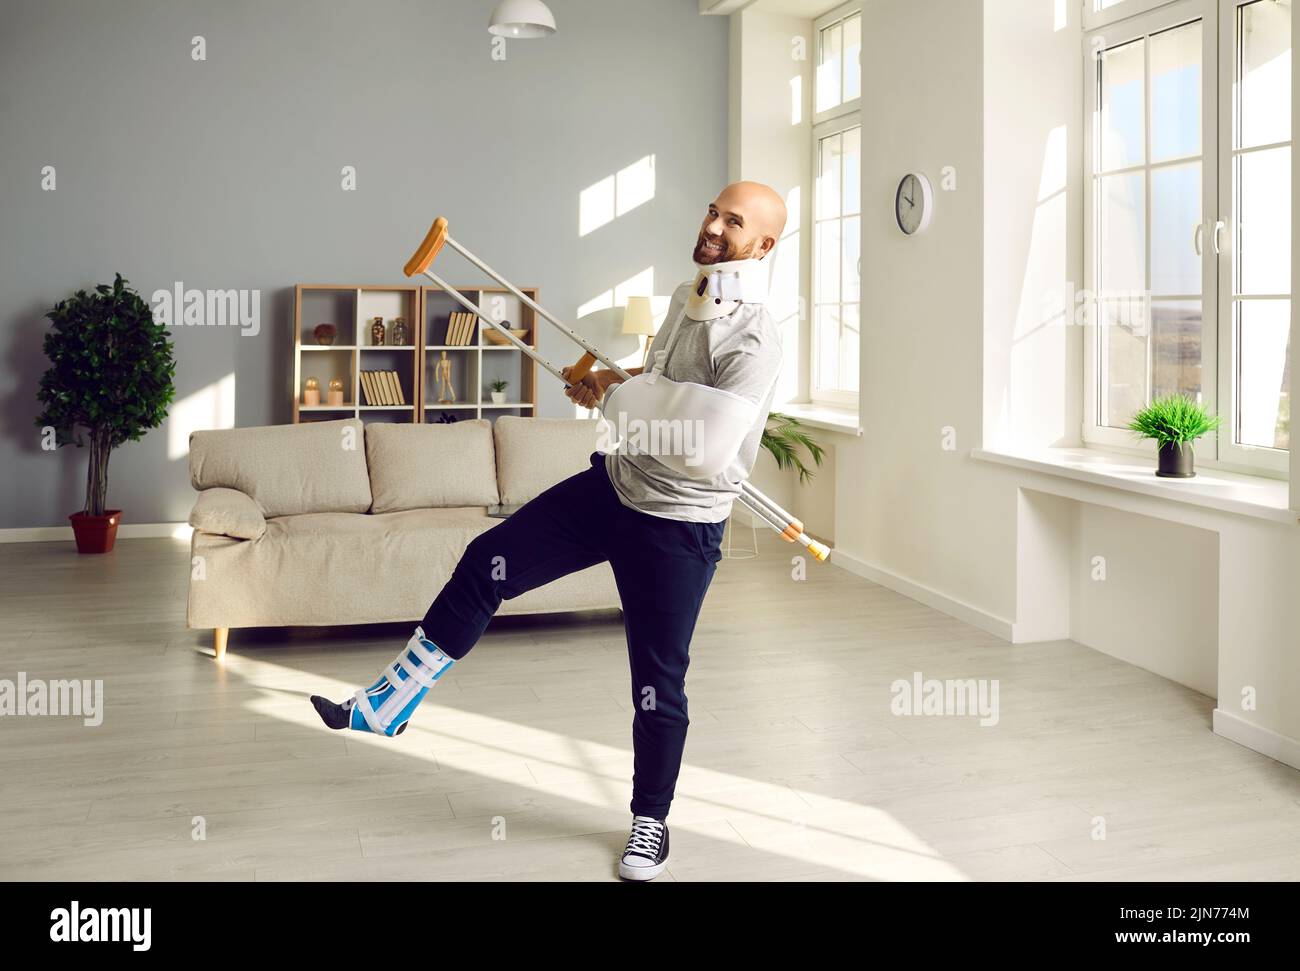 Man has fun during rehabilitation at home recovering from numerous physical injuries. Stock Photo